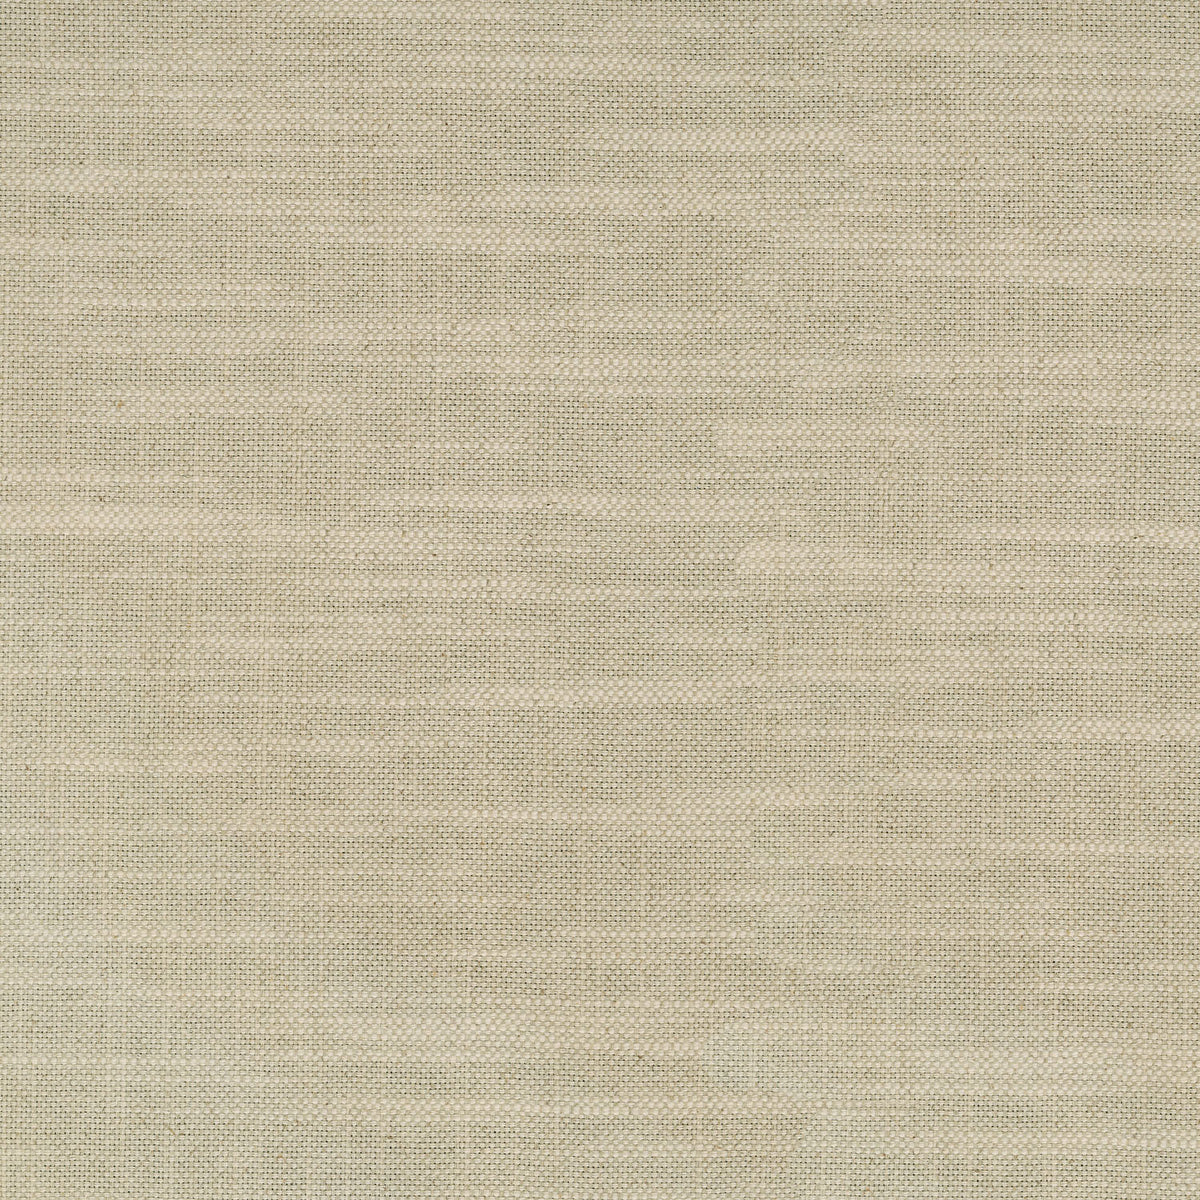 P/K Lifestyles Desmond Solid - Natural 409371 Fabric Swatch